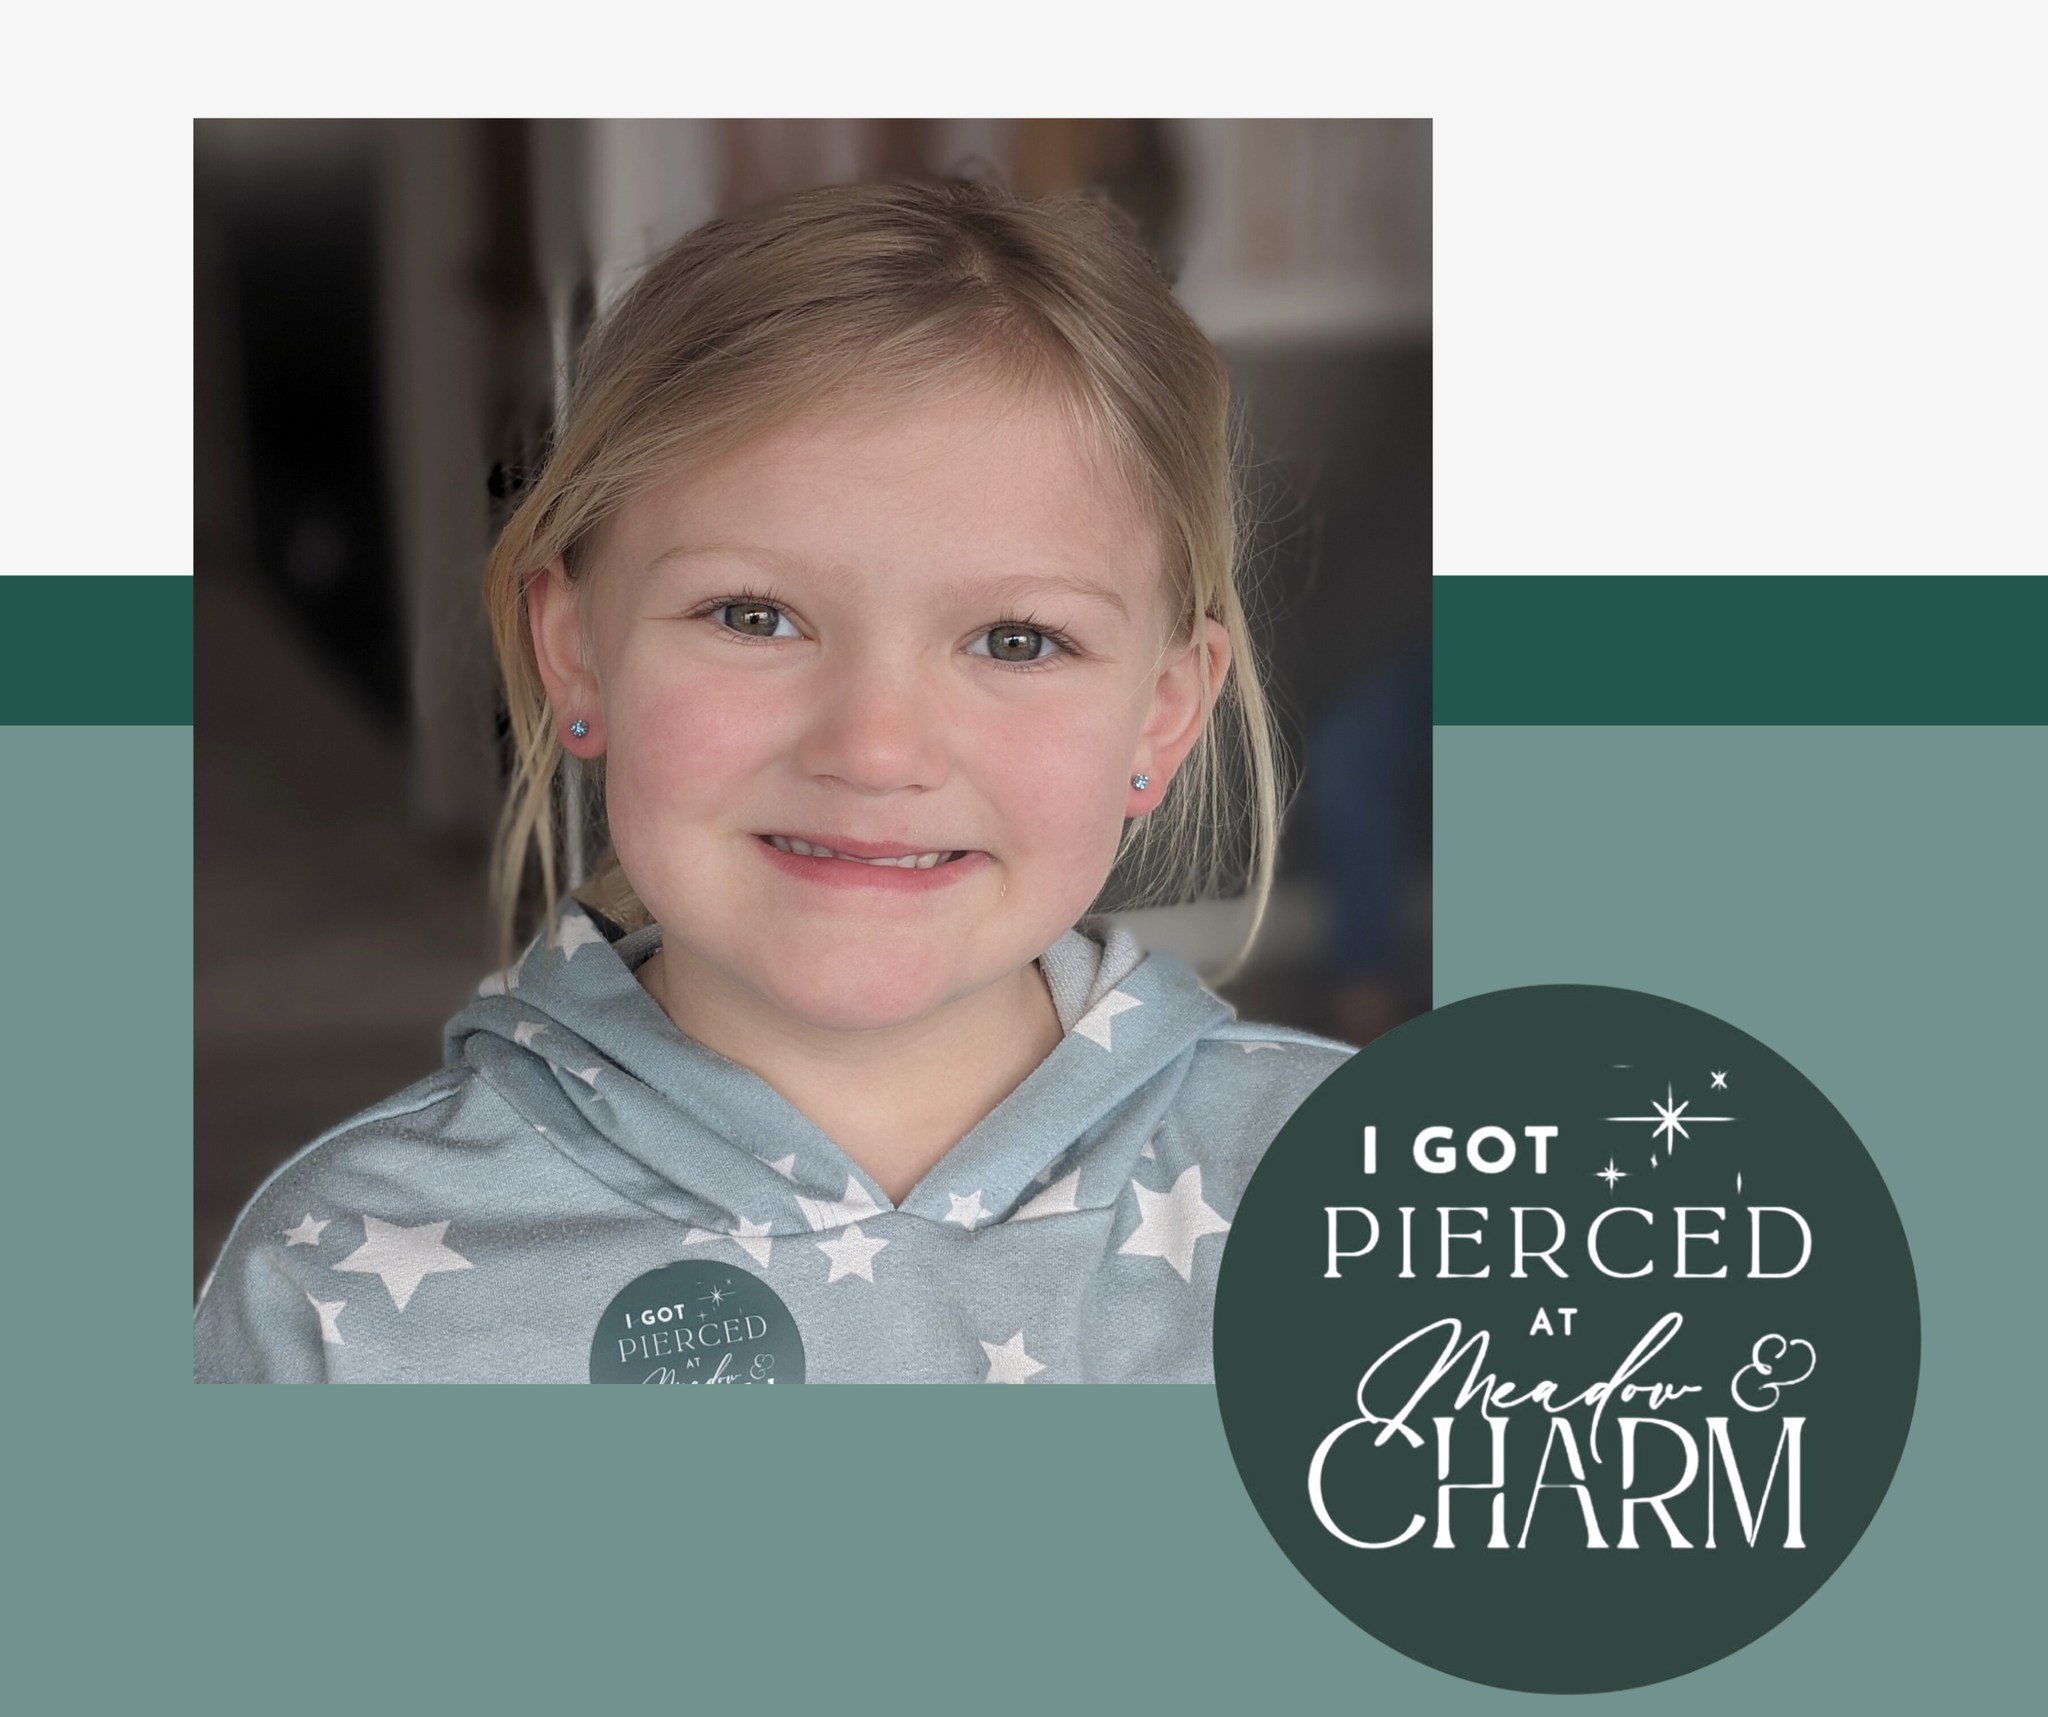 Getting your ears pierced at Meadow &amp; Charm is fun! We love serving your little ones in a beautiful, quiet environment where they get our one on one attention! 
.
Book your appointment now at www.meadowandcharm.com